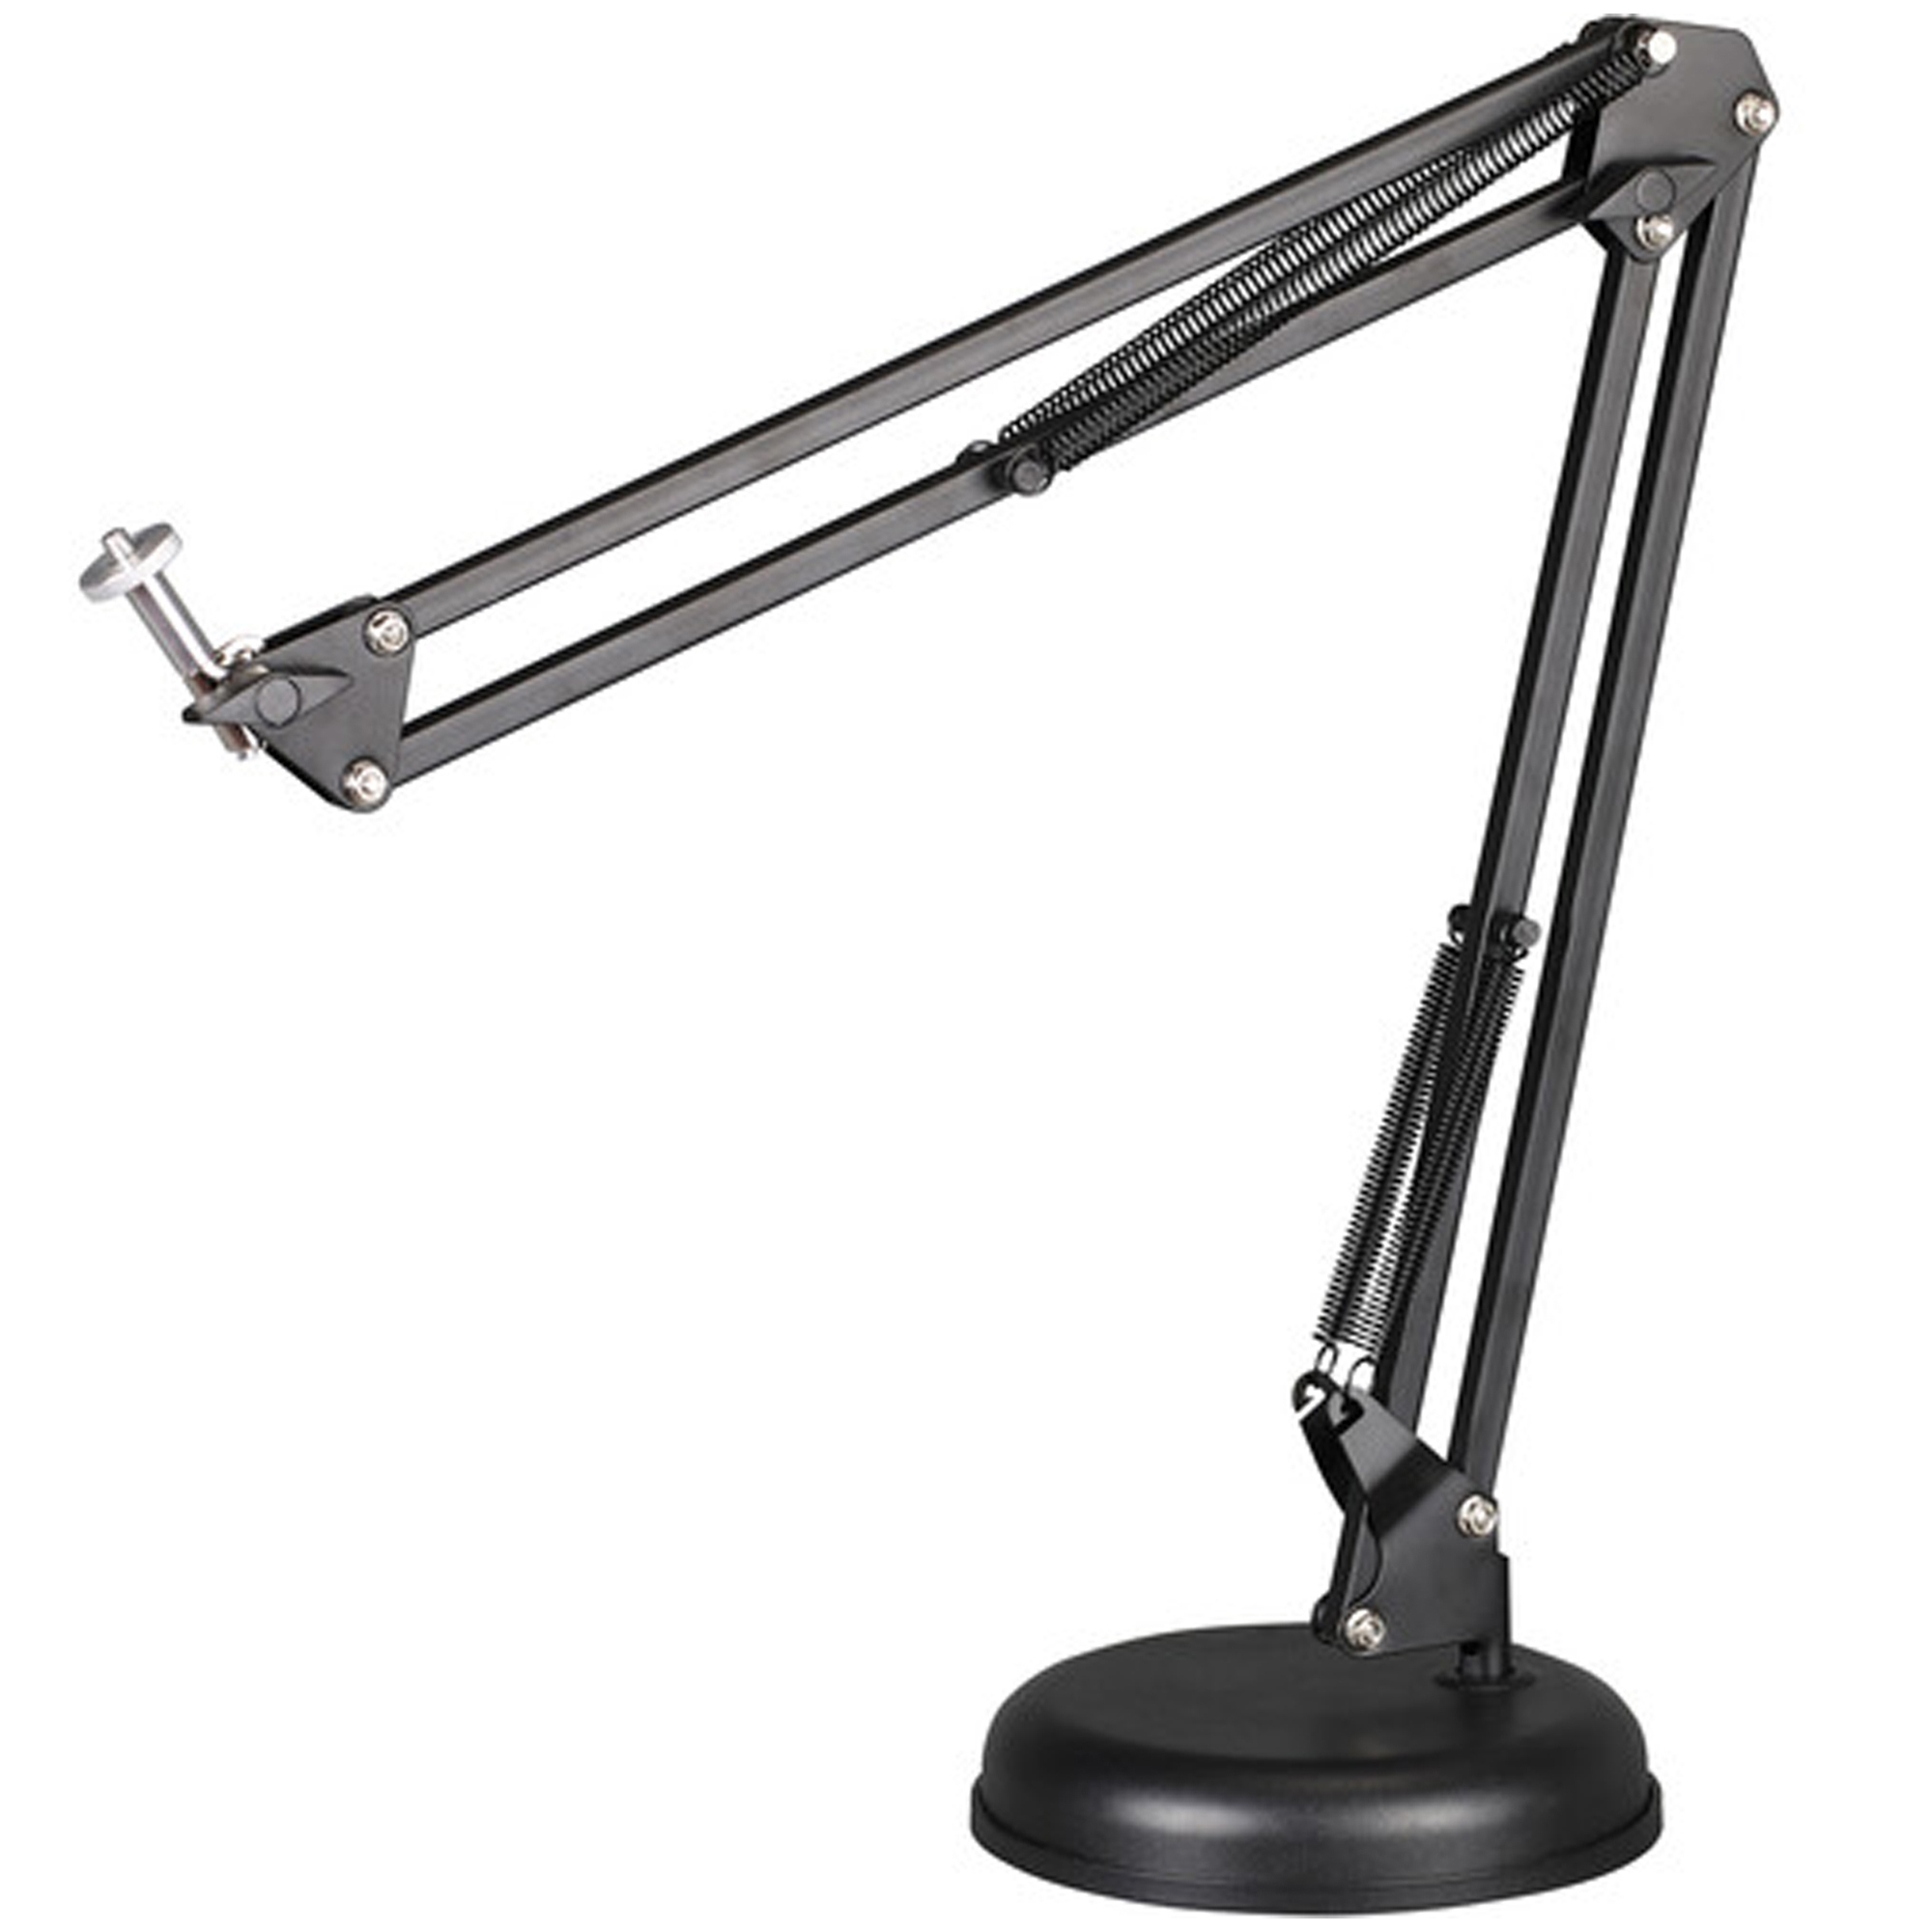 Technical Pro Microphone Suspension Height Adjustable Crane Arm, Mic Holder, Precise Positioning For Broadcasting And Sound Recording